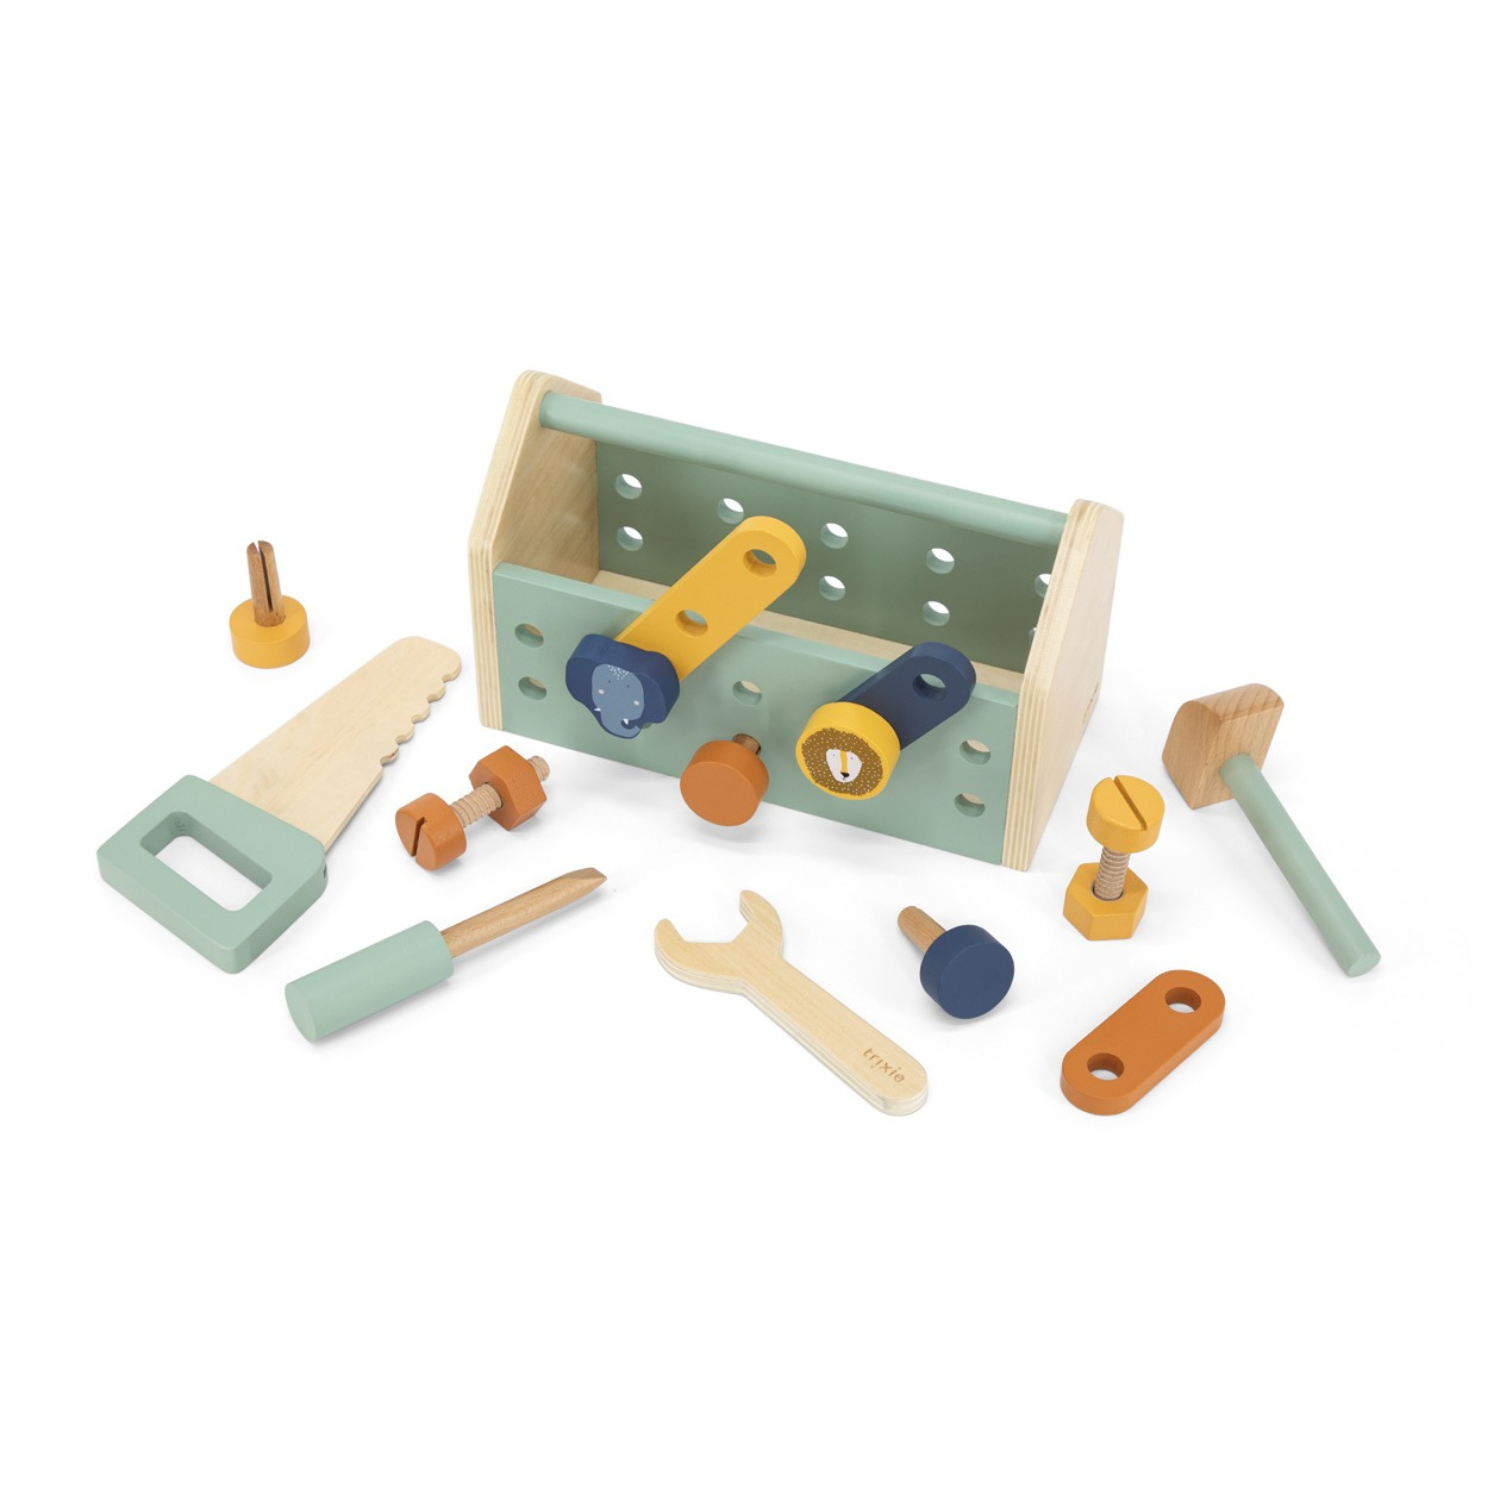 An image of Kids Wooden Tool Box - Tool Set - Wooden Toys | Trixie